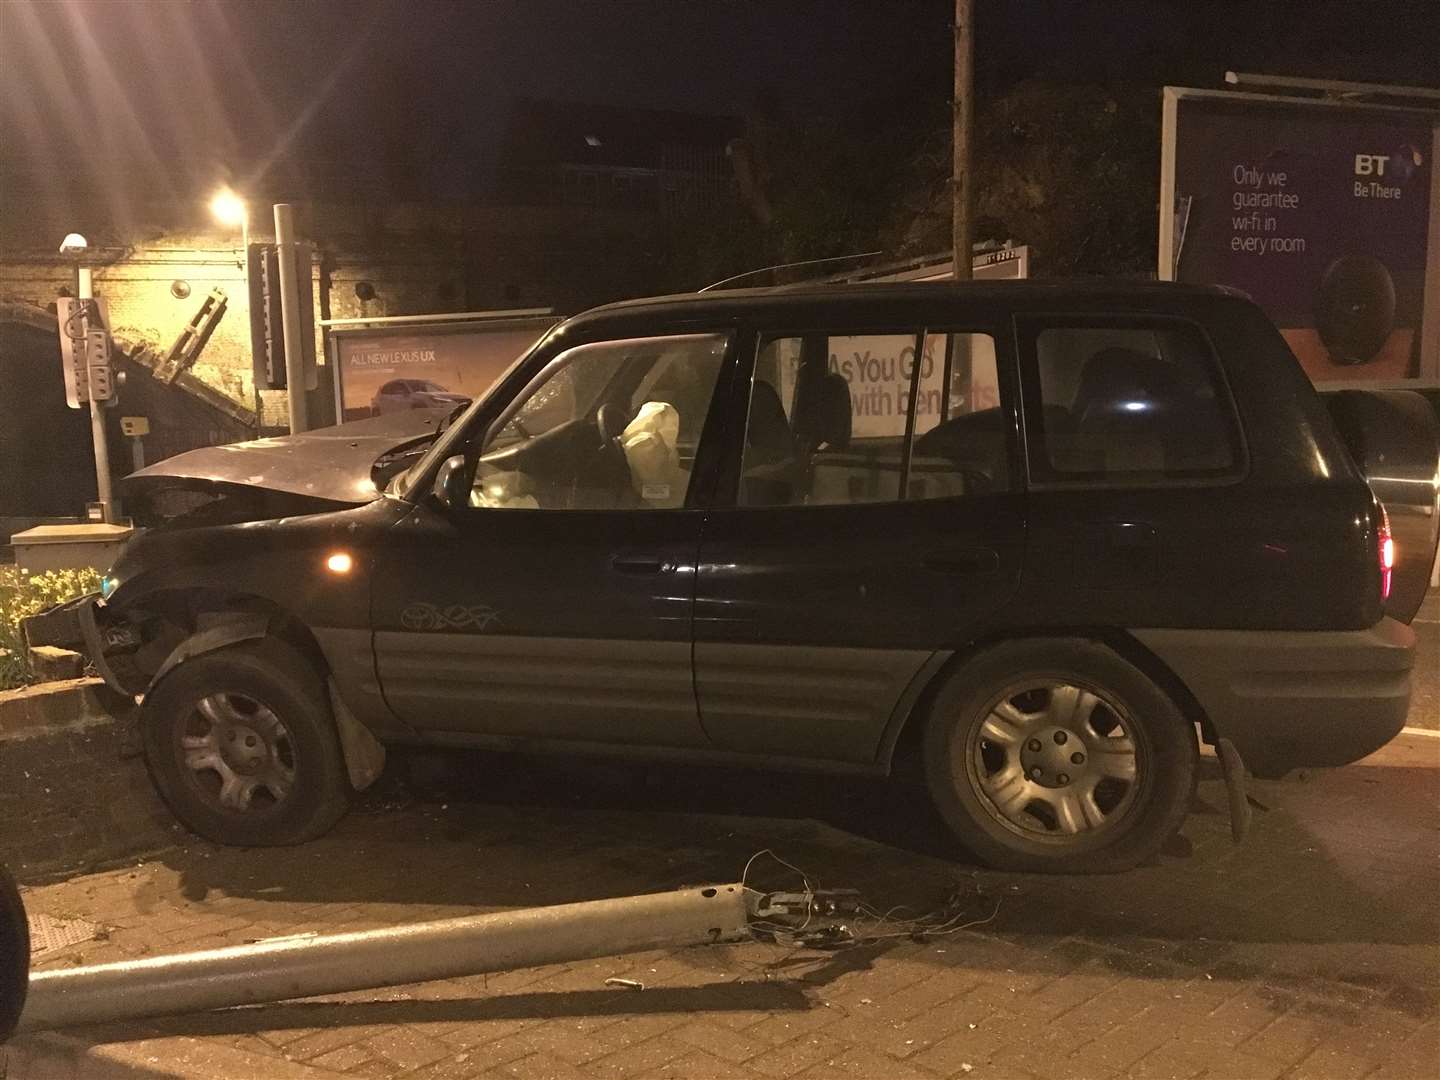 Police were called after a car crashed into a set of traffic lights on Chatham Hill (8022178)